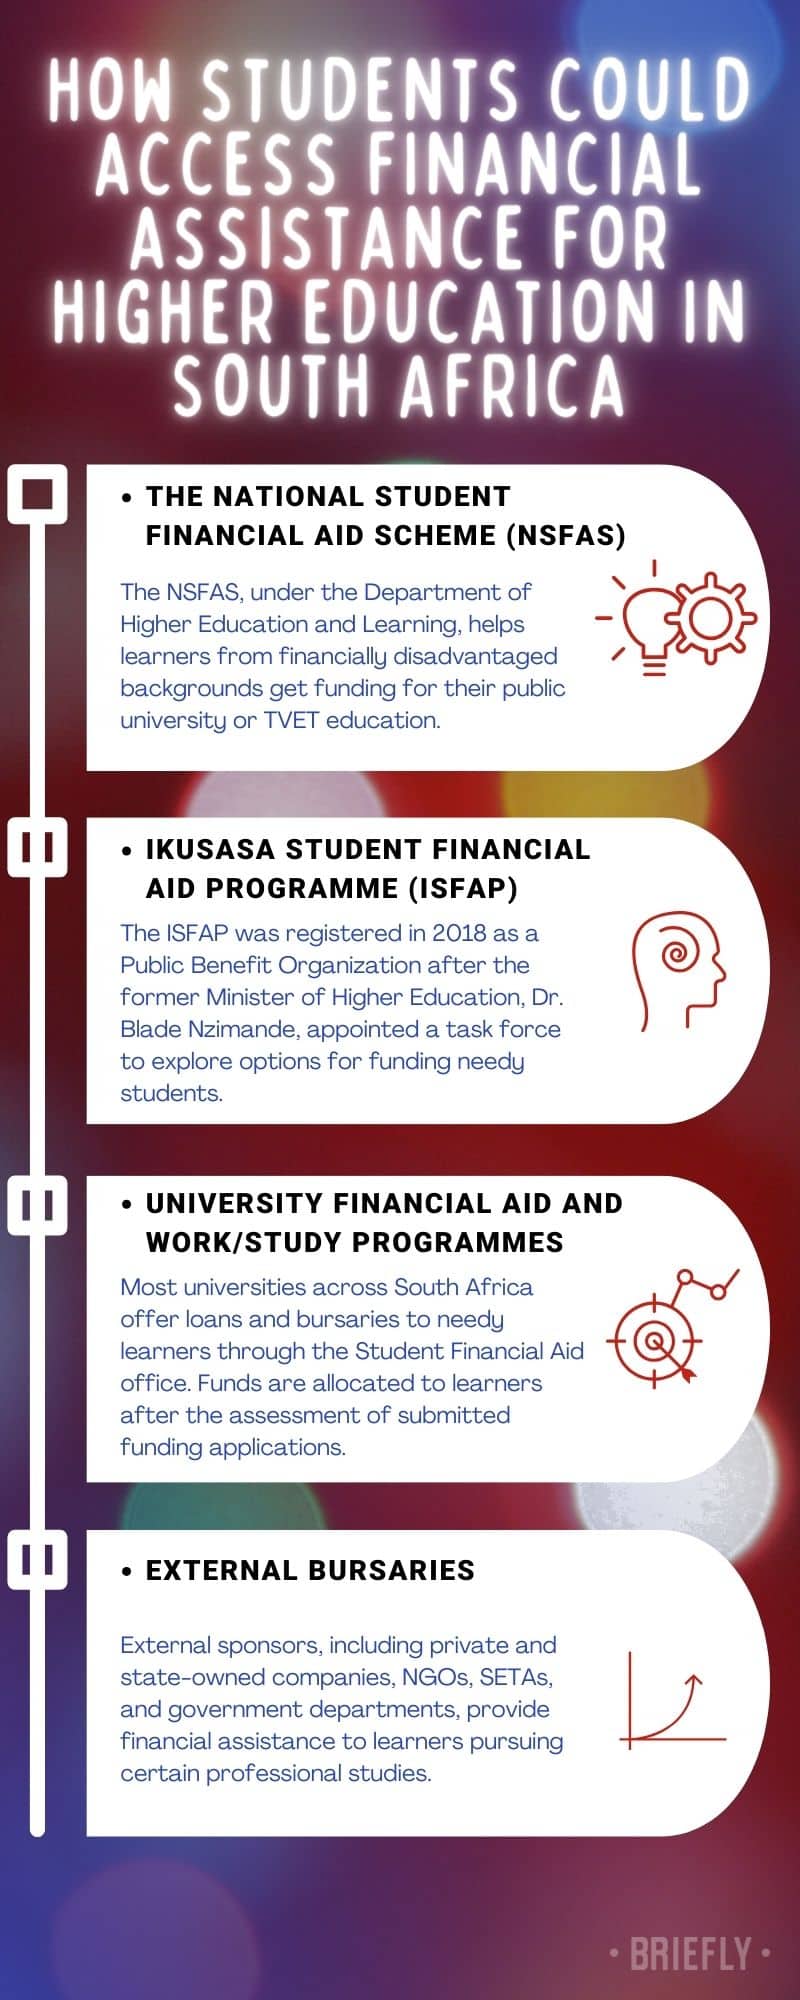 How students could access financial assistance for higher education in South Africa